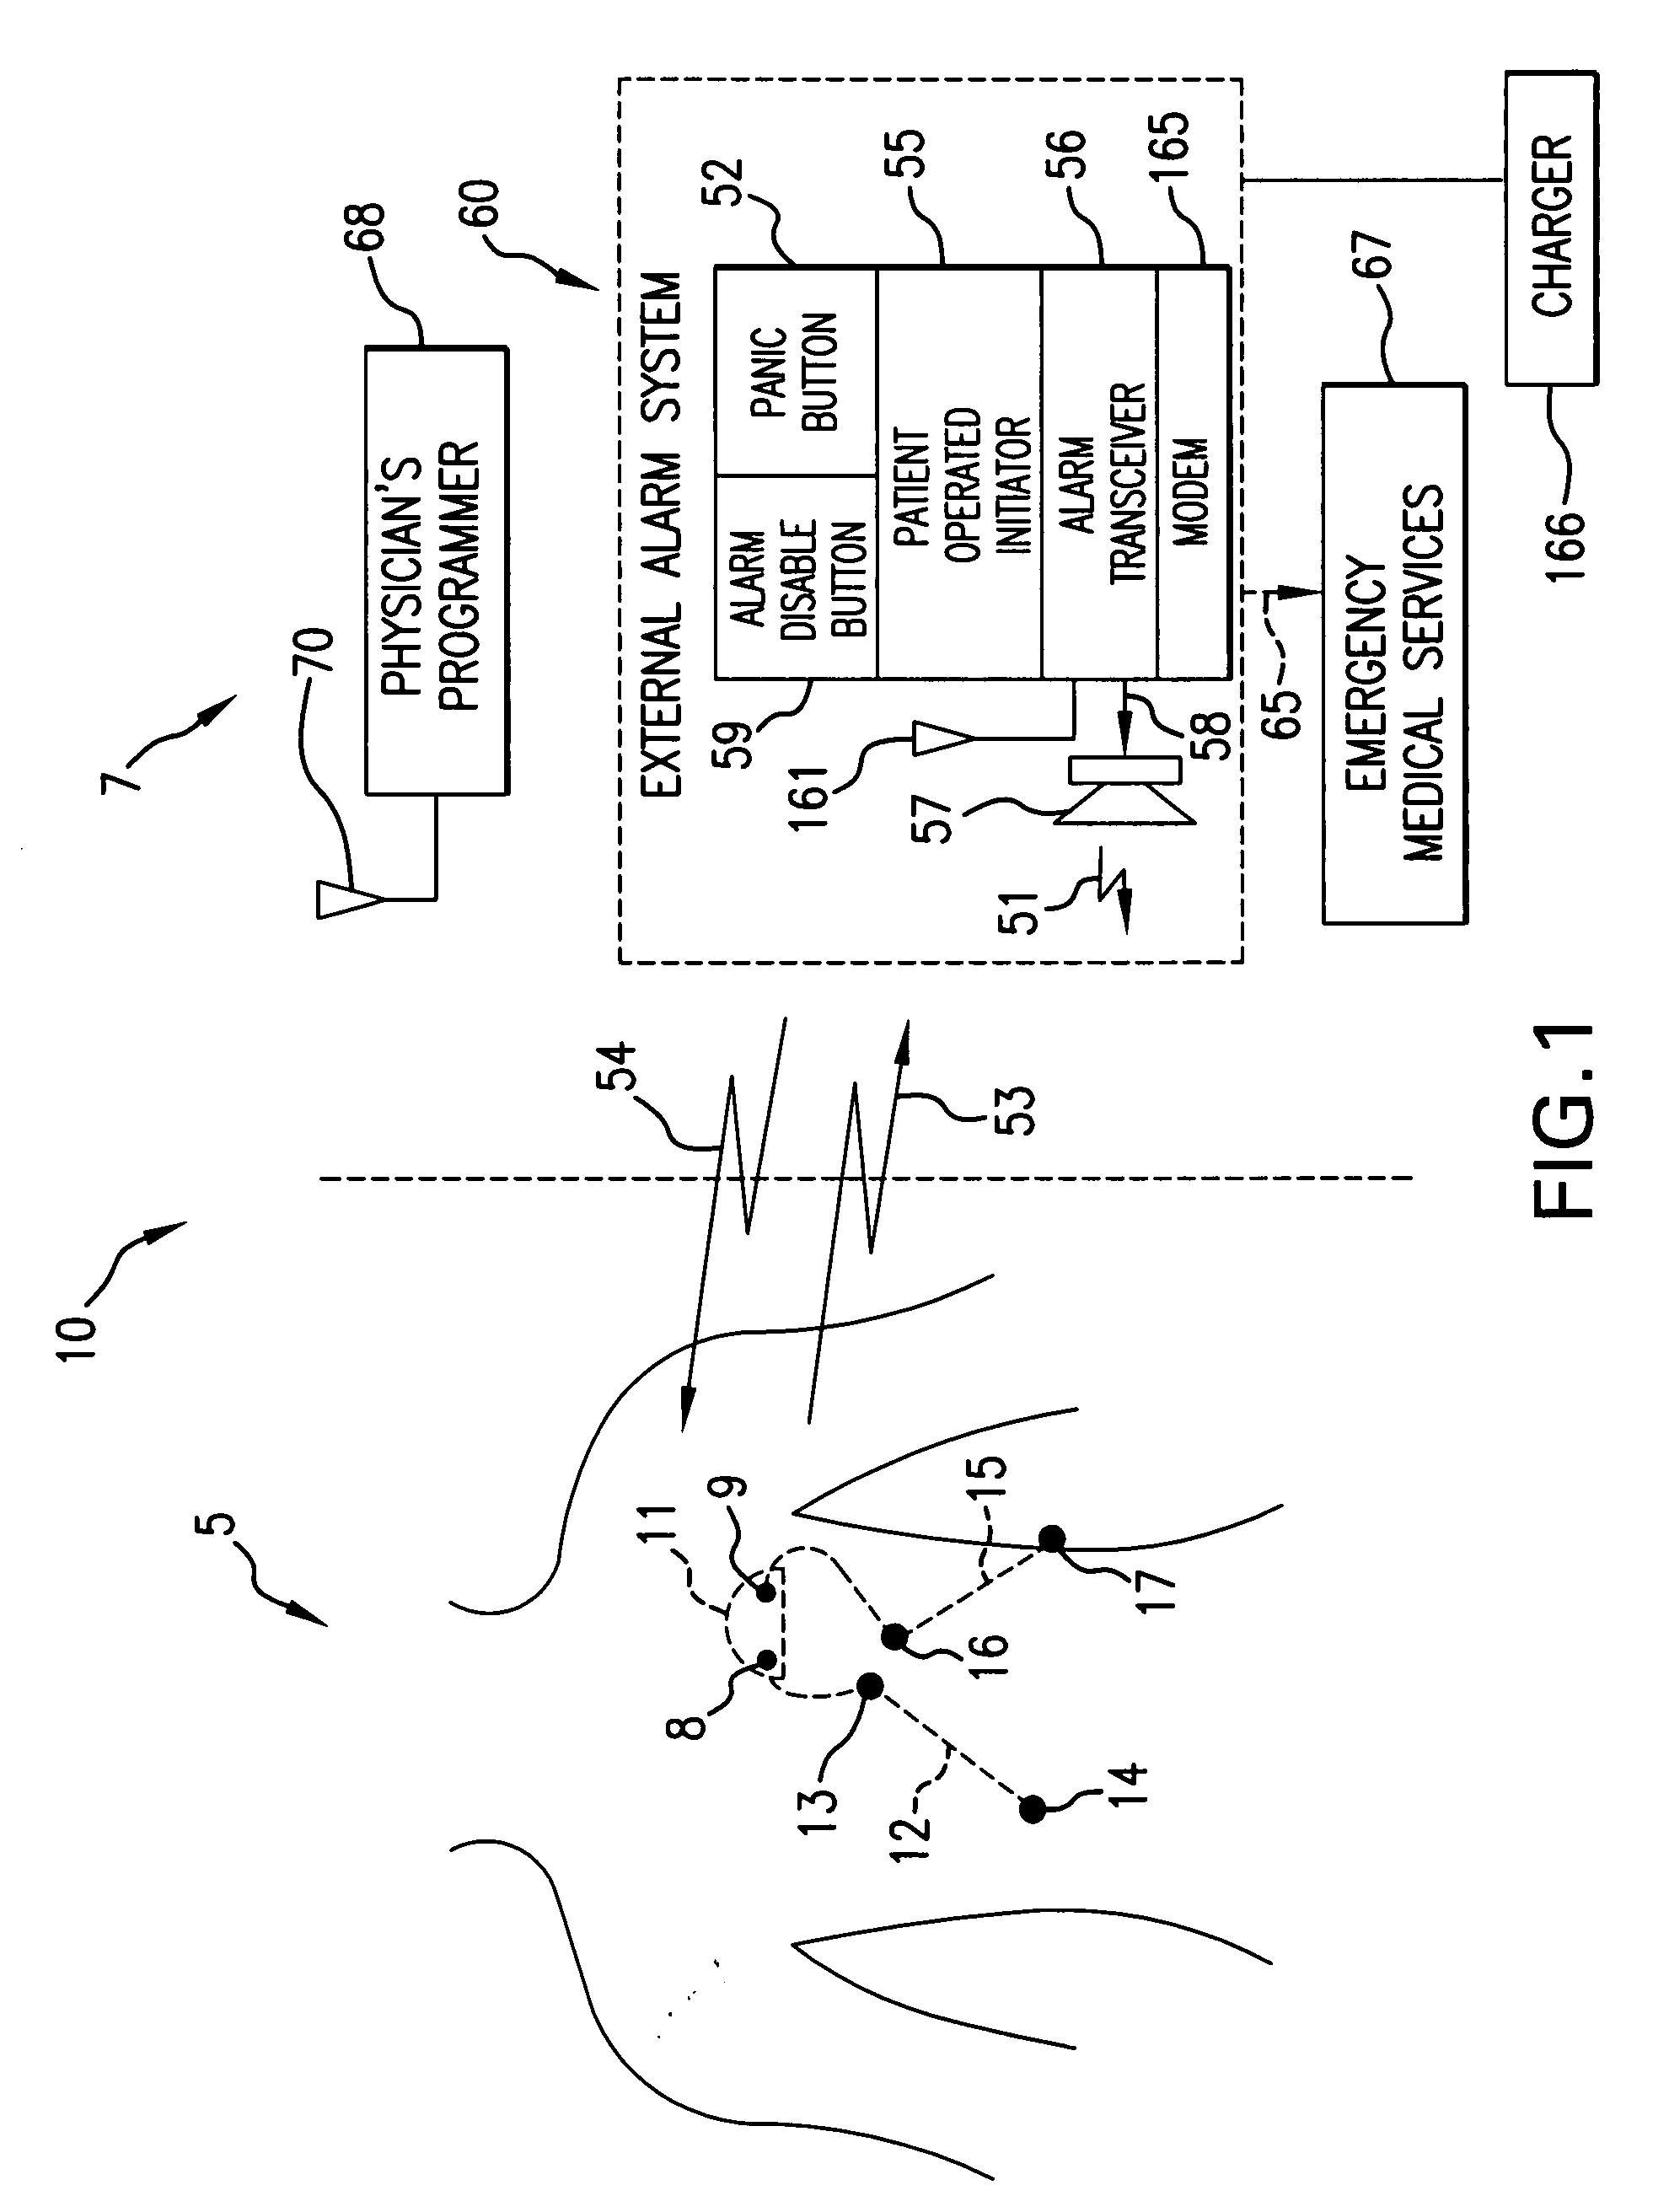 System and methods for detecting ischemia with a limited extracardiac lead set